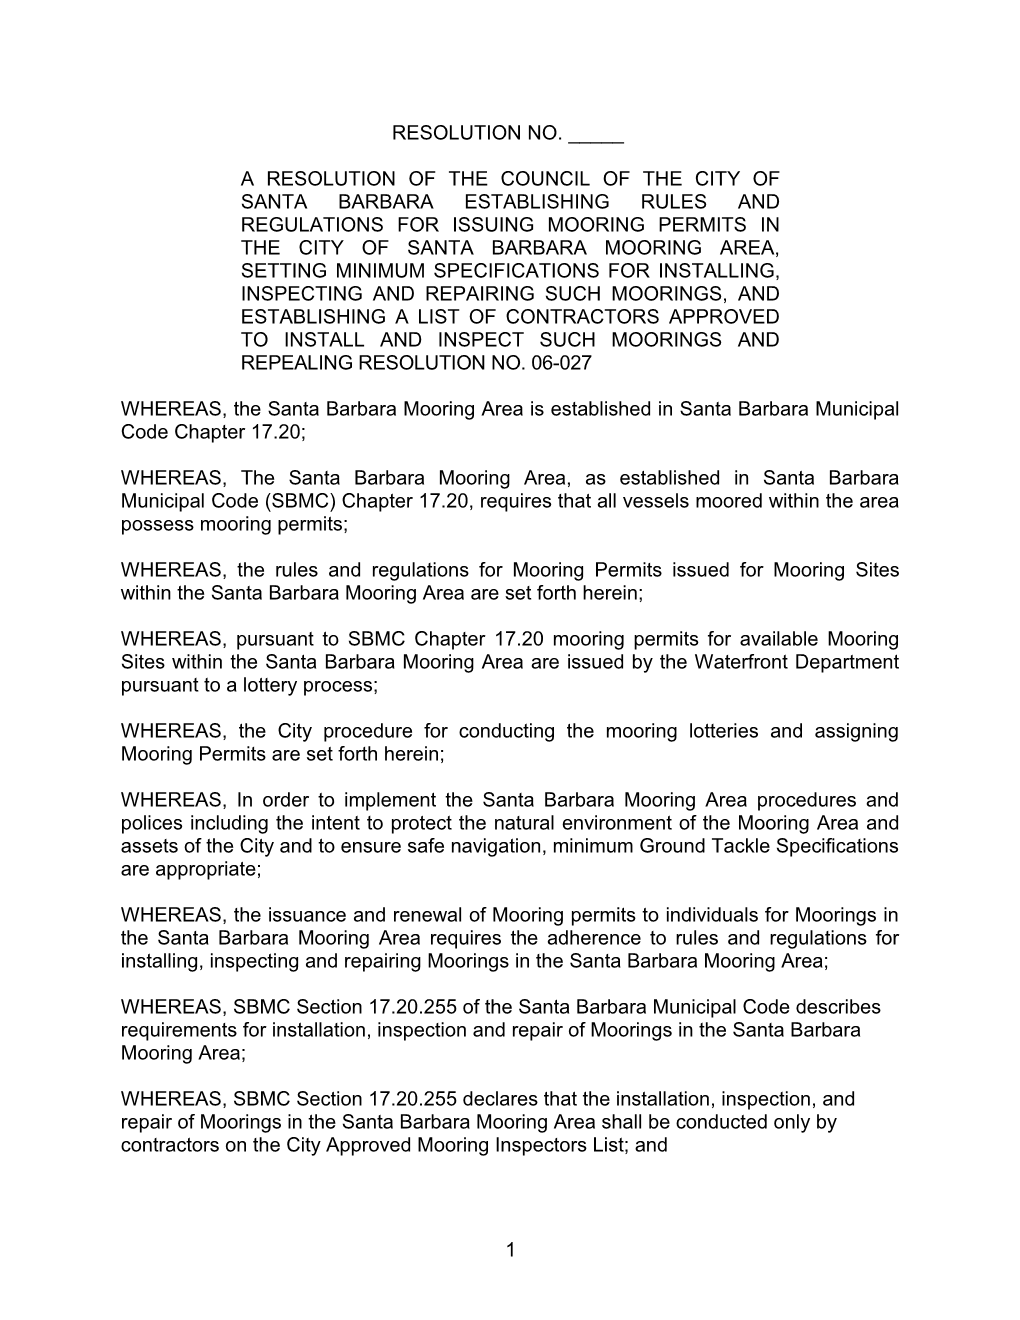 A Resolution of the Council of the City of Santa Barbara Establishing Rules and Regulations